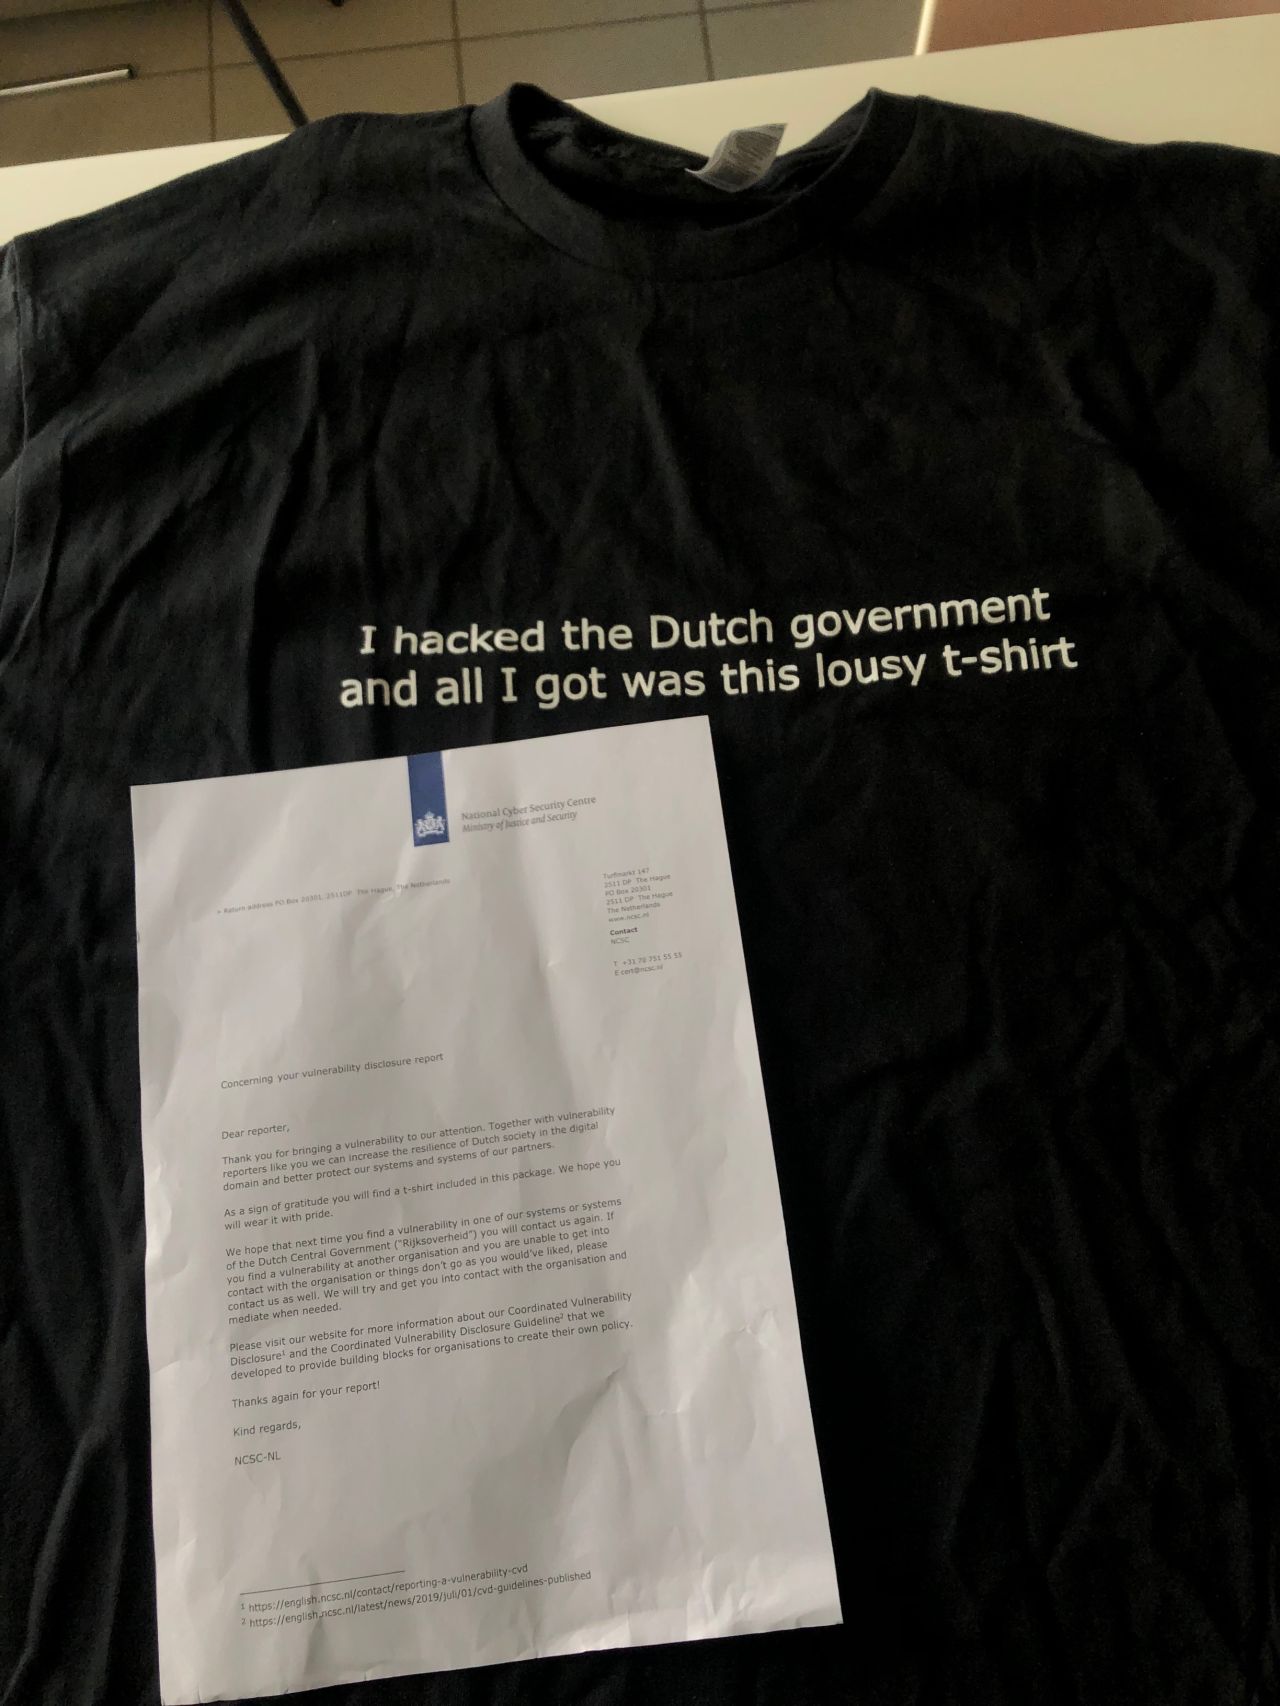 Hacking the Dutch government